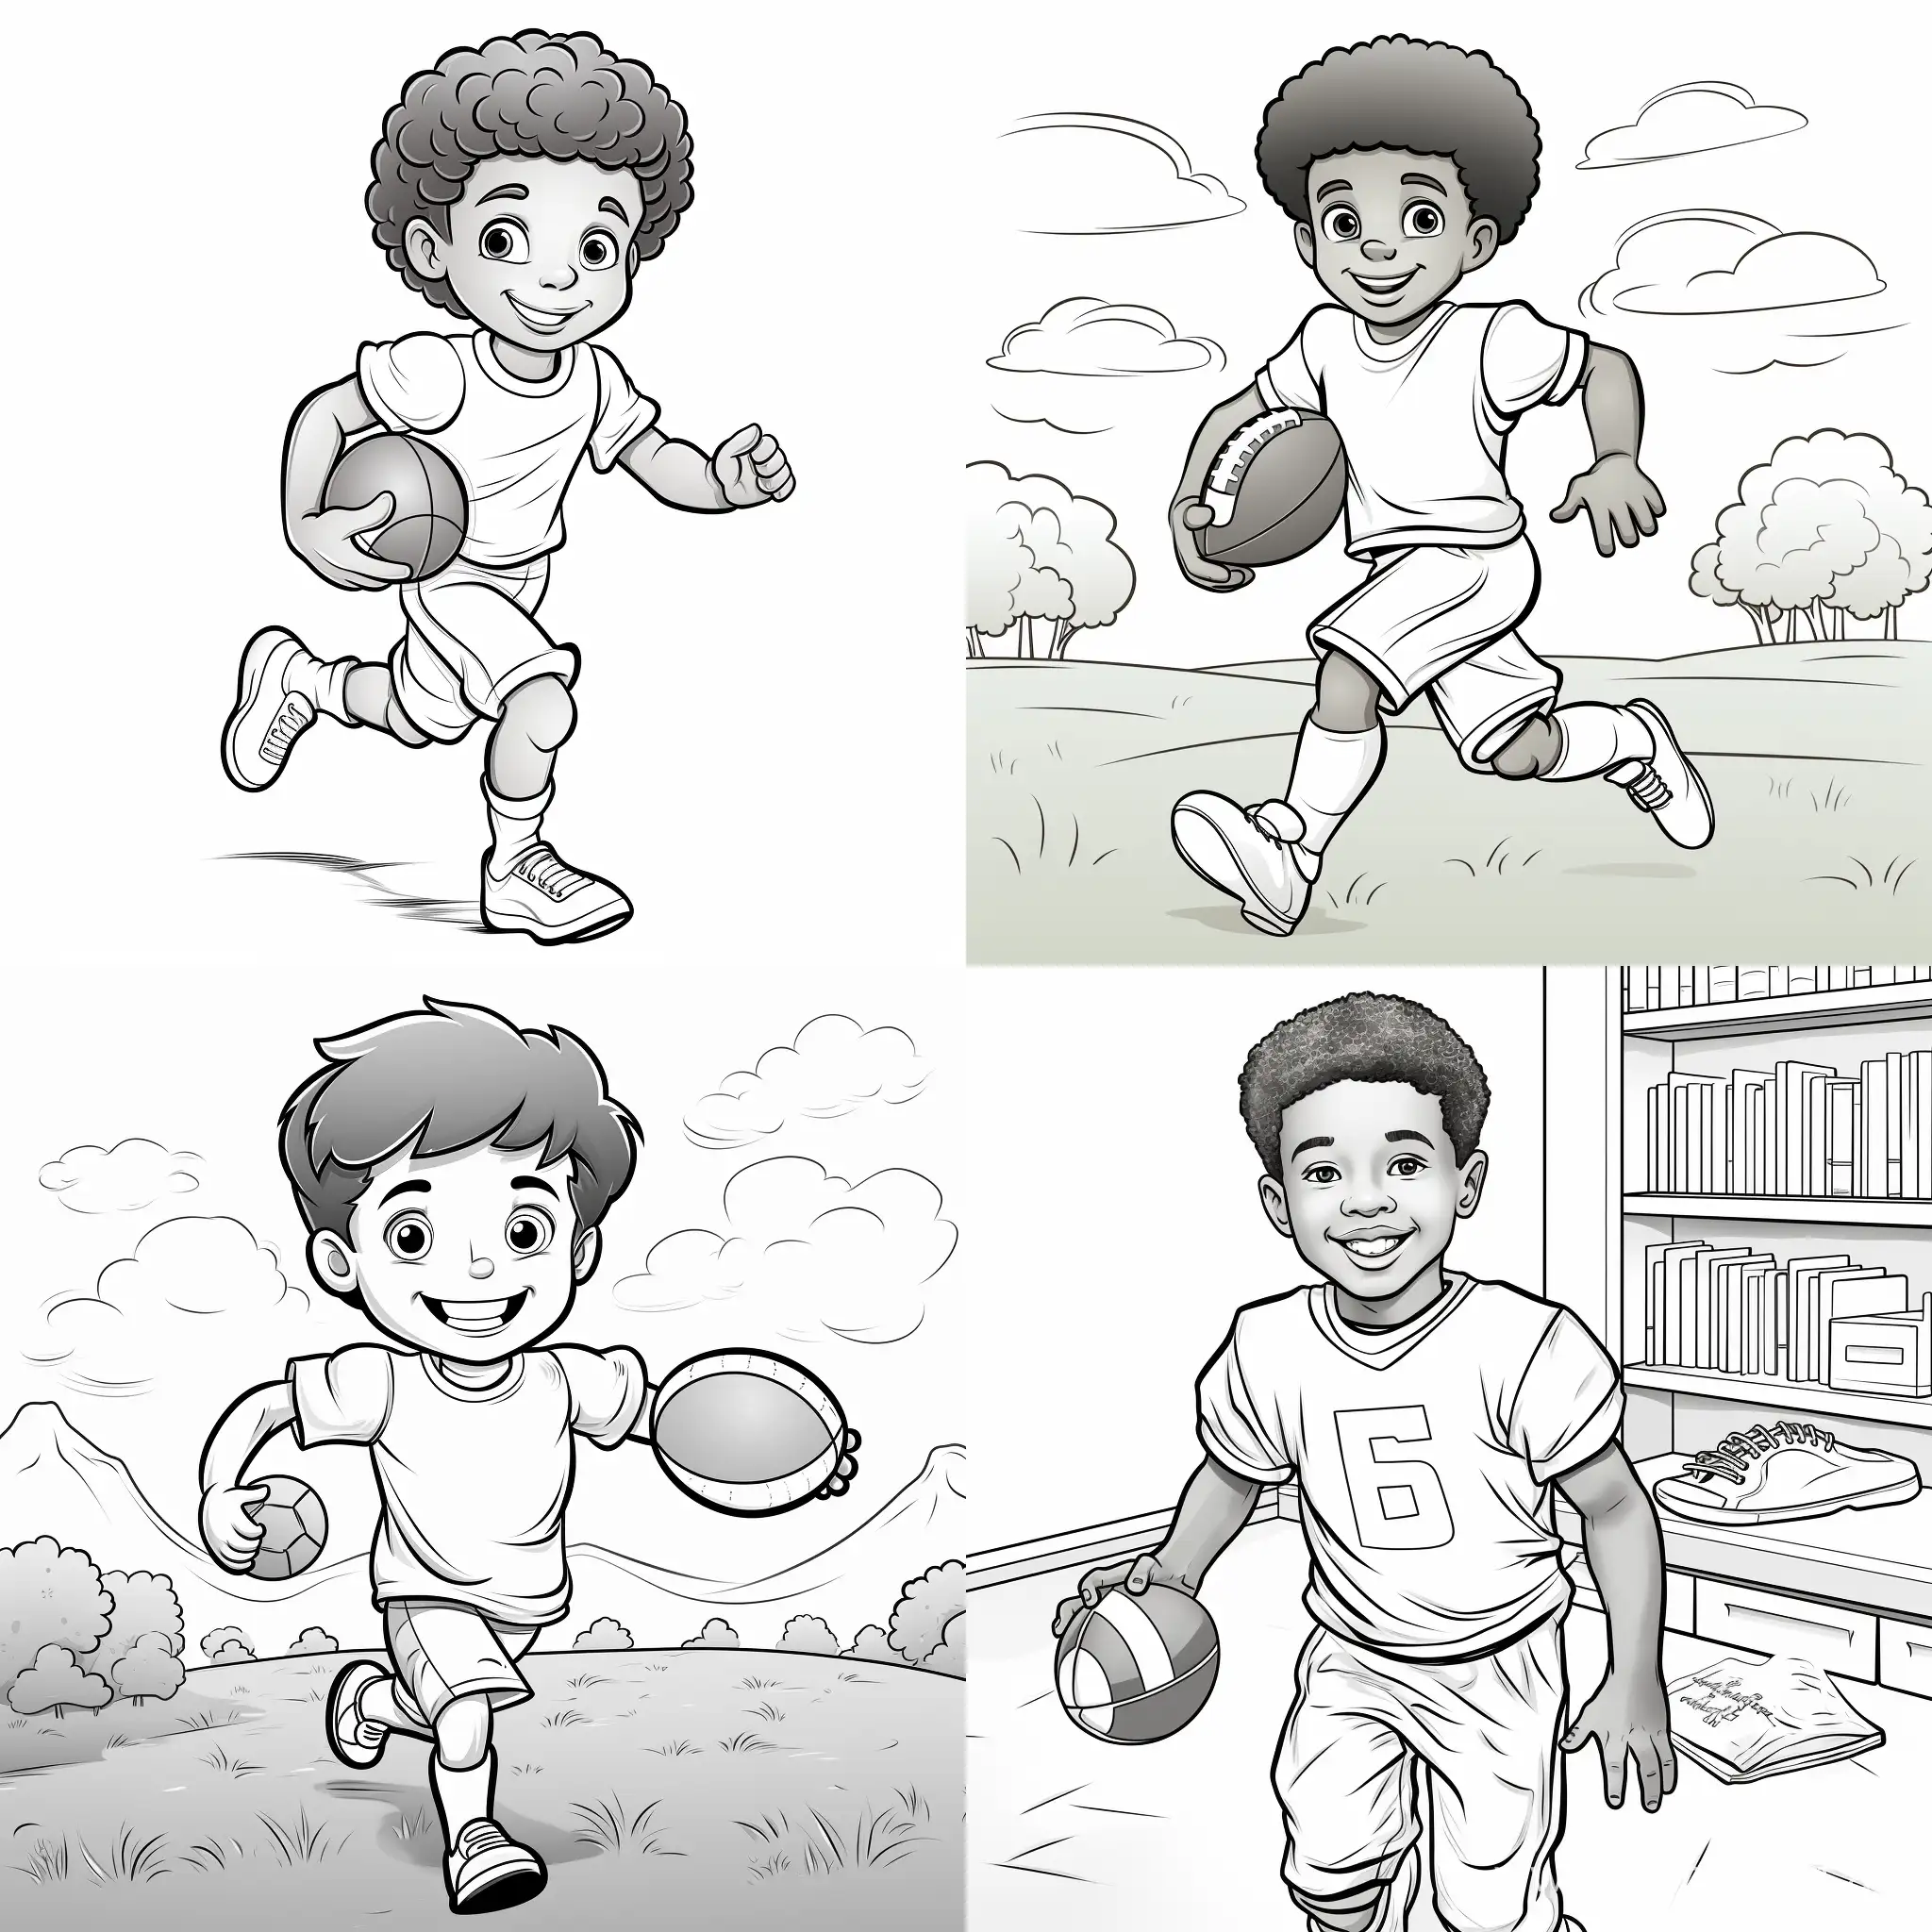 Black and white contour black boy playing football cartoon for colouring for kids age 5-8 cute